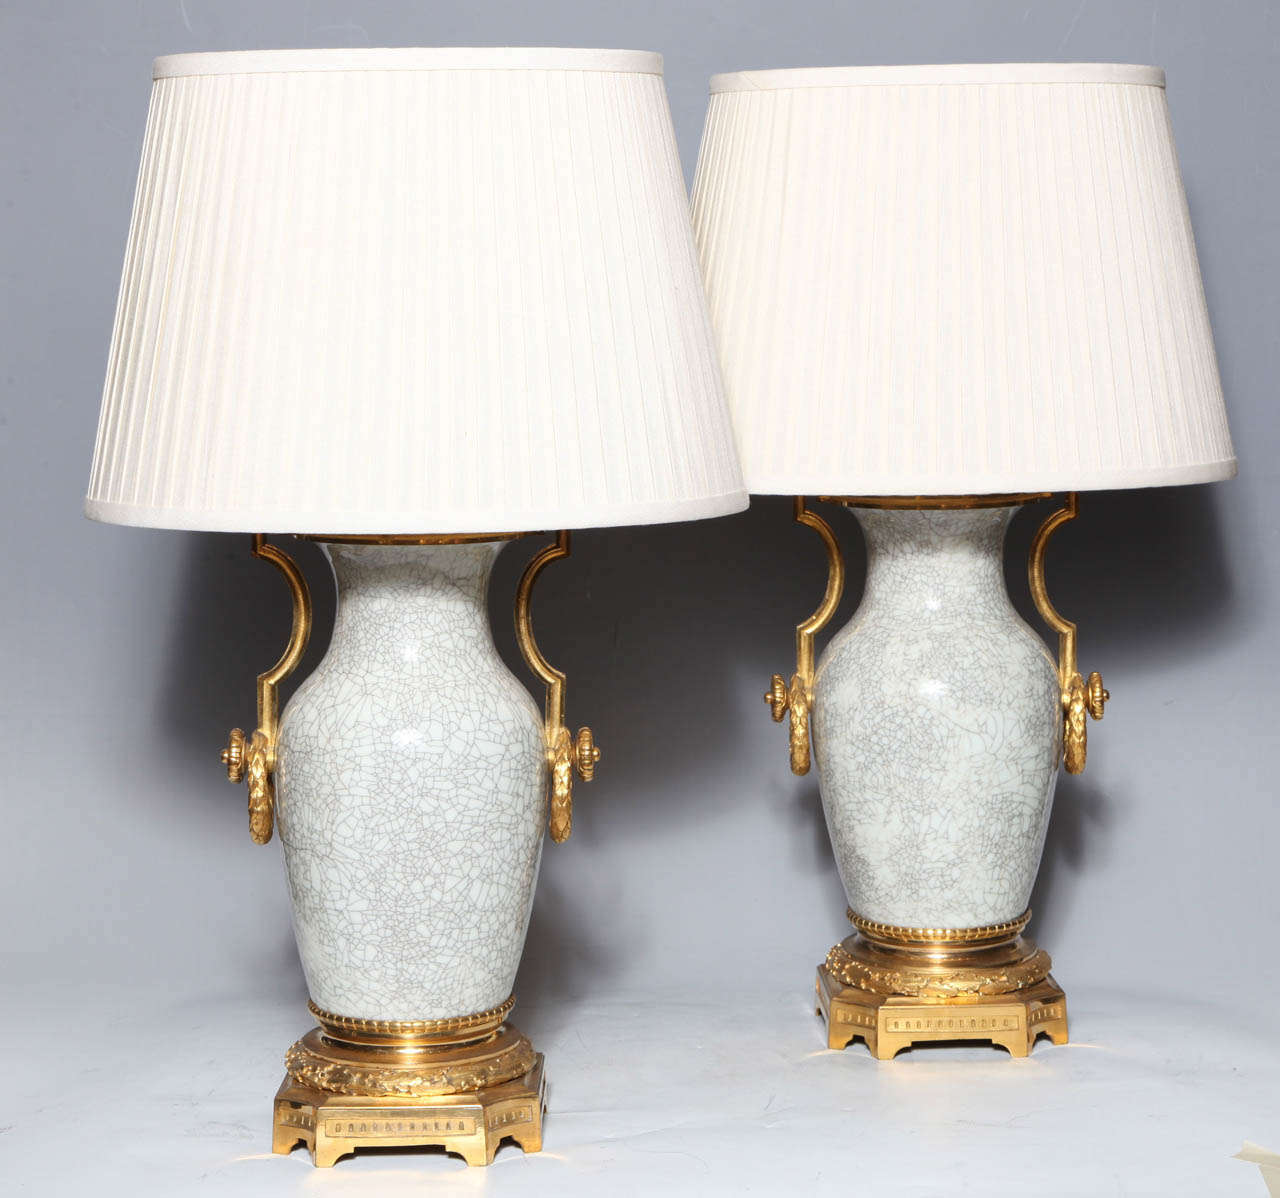 Pair of Chinese, Crackle Finish, Celadon Porcelain Vases with Gilt Bronze Mounts For Sale 1